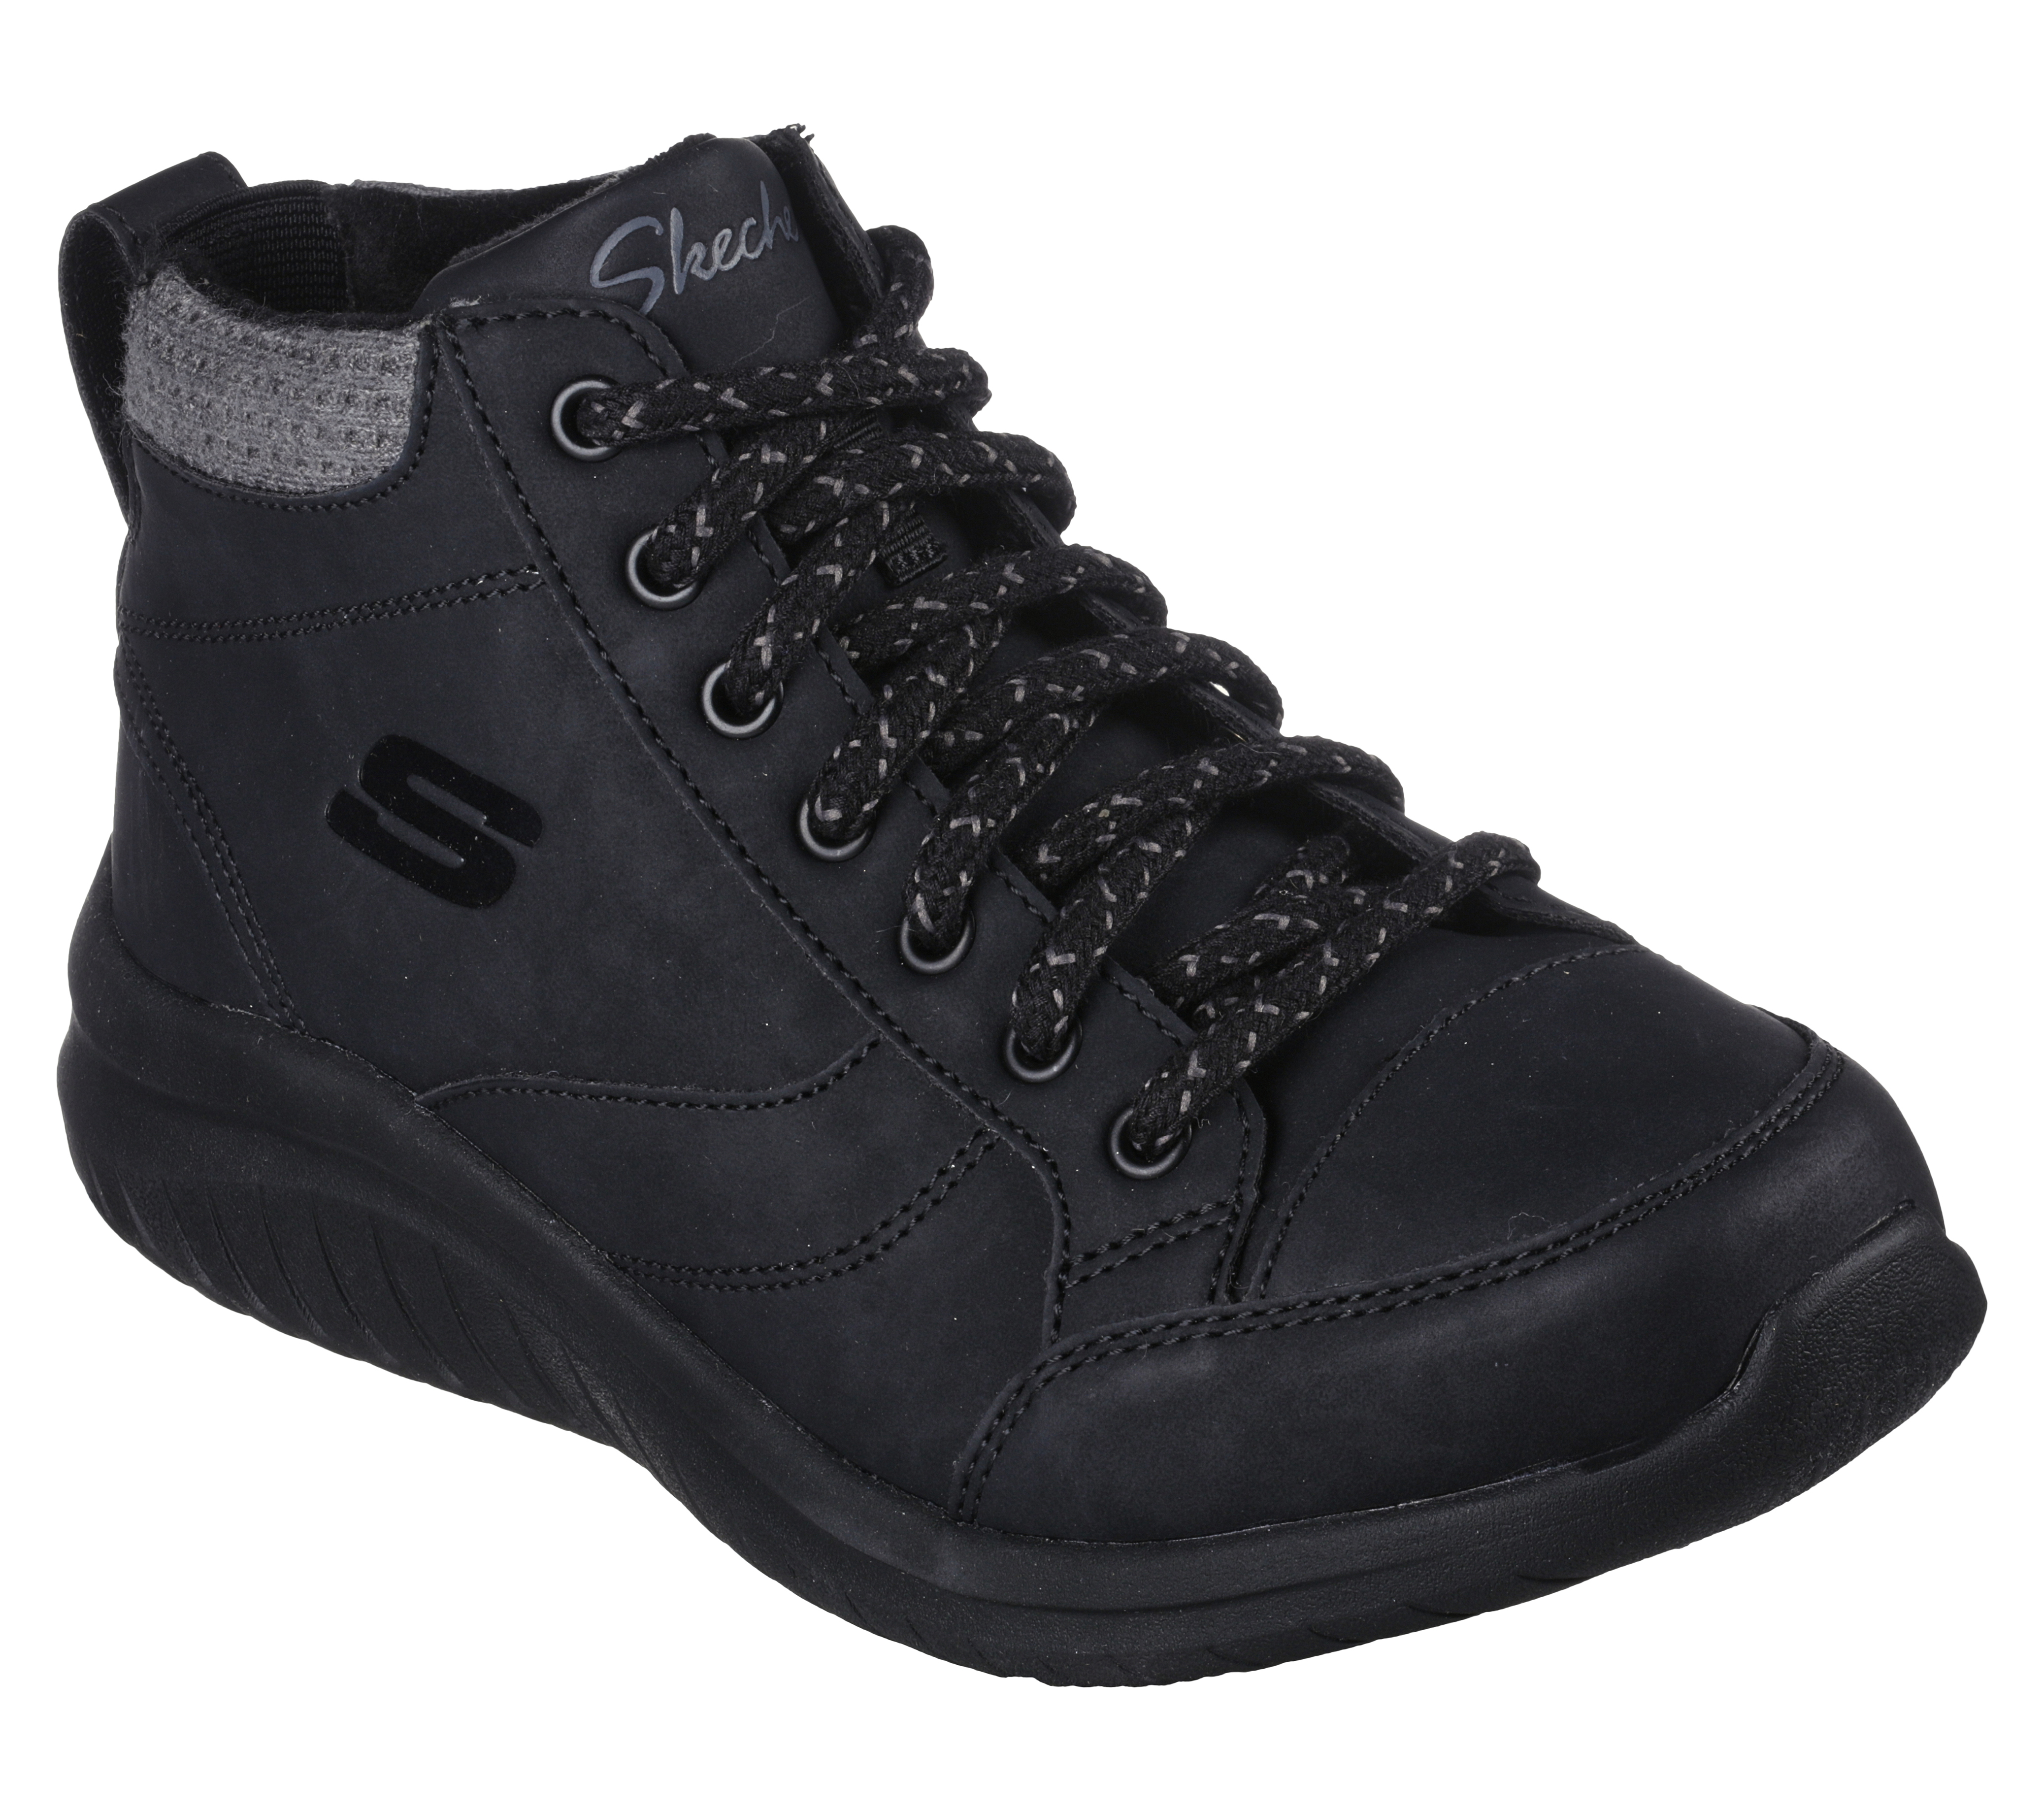 Skechers High sneakers - Ultra Flex 2.0-social Crew - 167449-CSNT - Online  shop for sneakers, shoes and boots